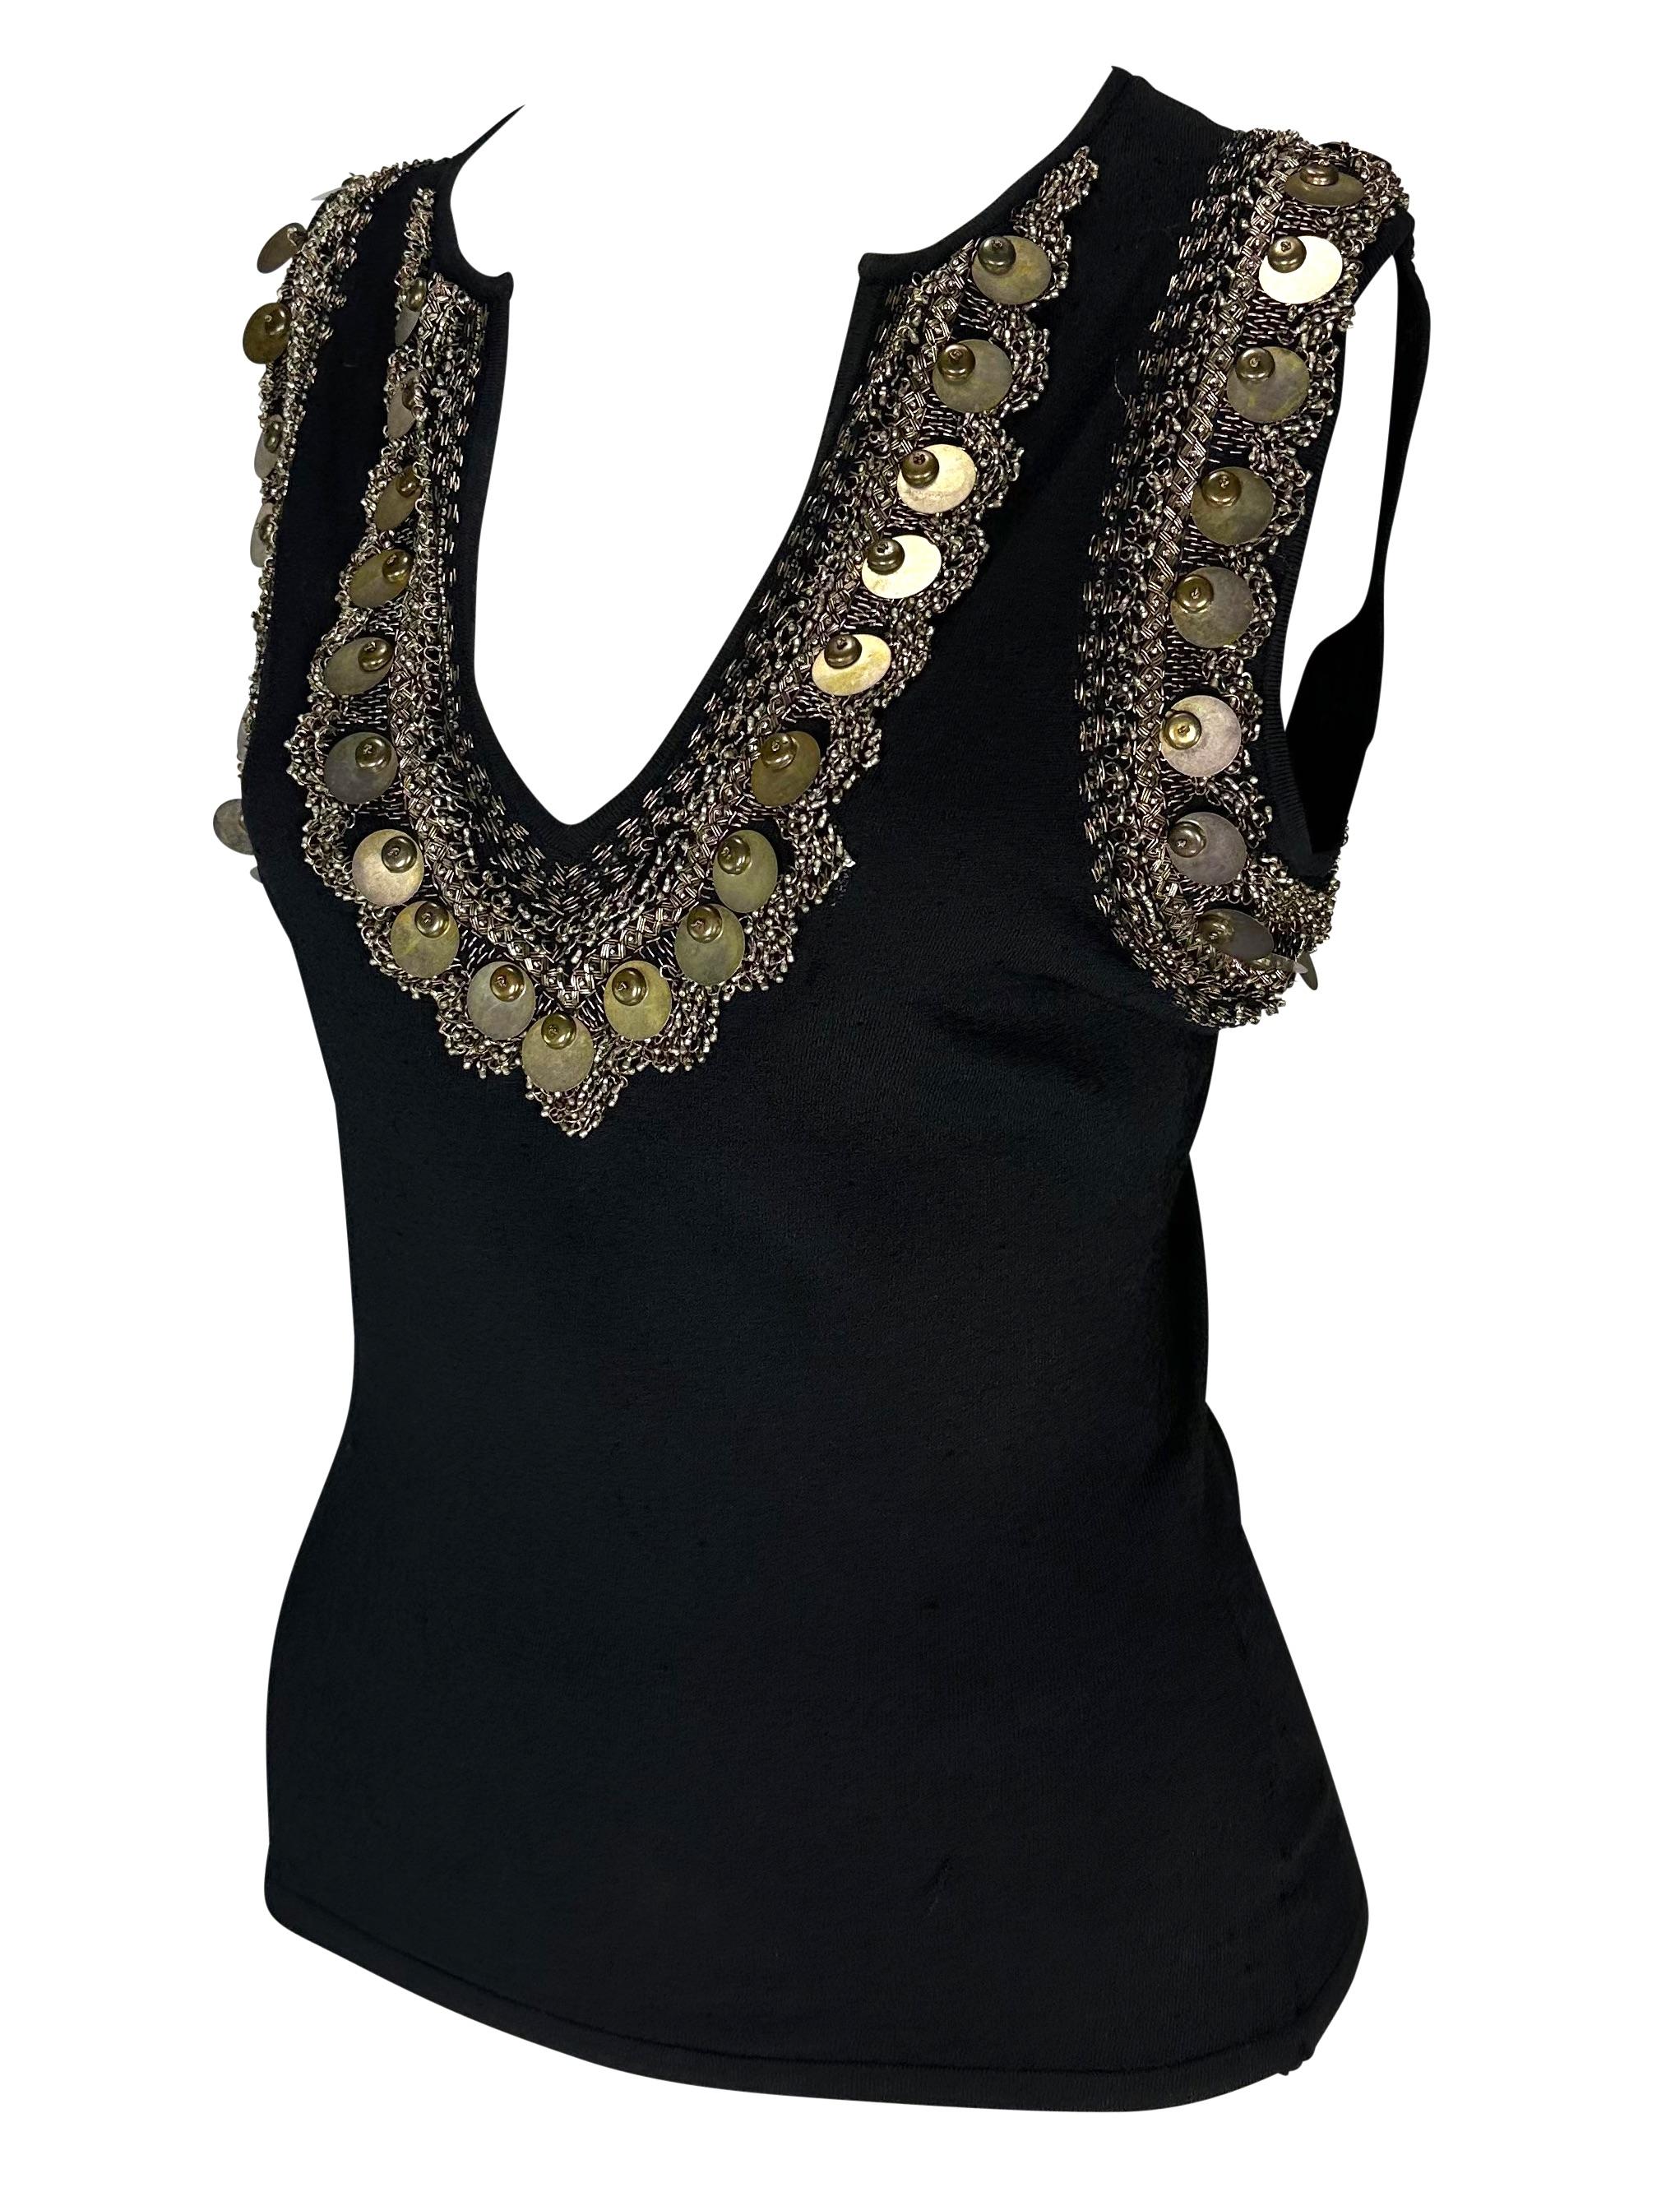 Presenting a fabulous black brass embroidered Versace sleeveless top, designed by Donatella Versace. From the Spring/Summer 2004 collection, this top features a deep v-neckline and is made complete with brassy embroidery, beads, and discs around the